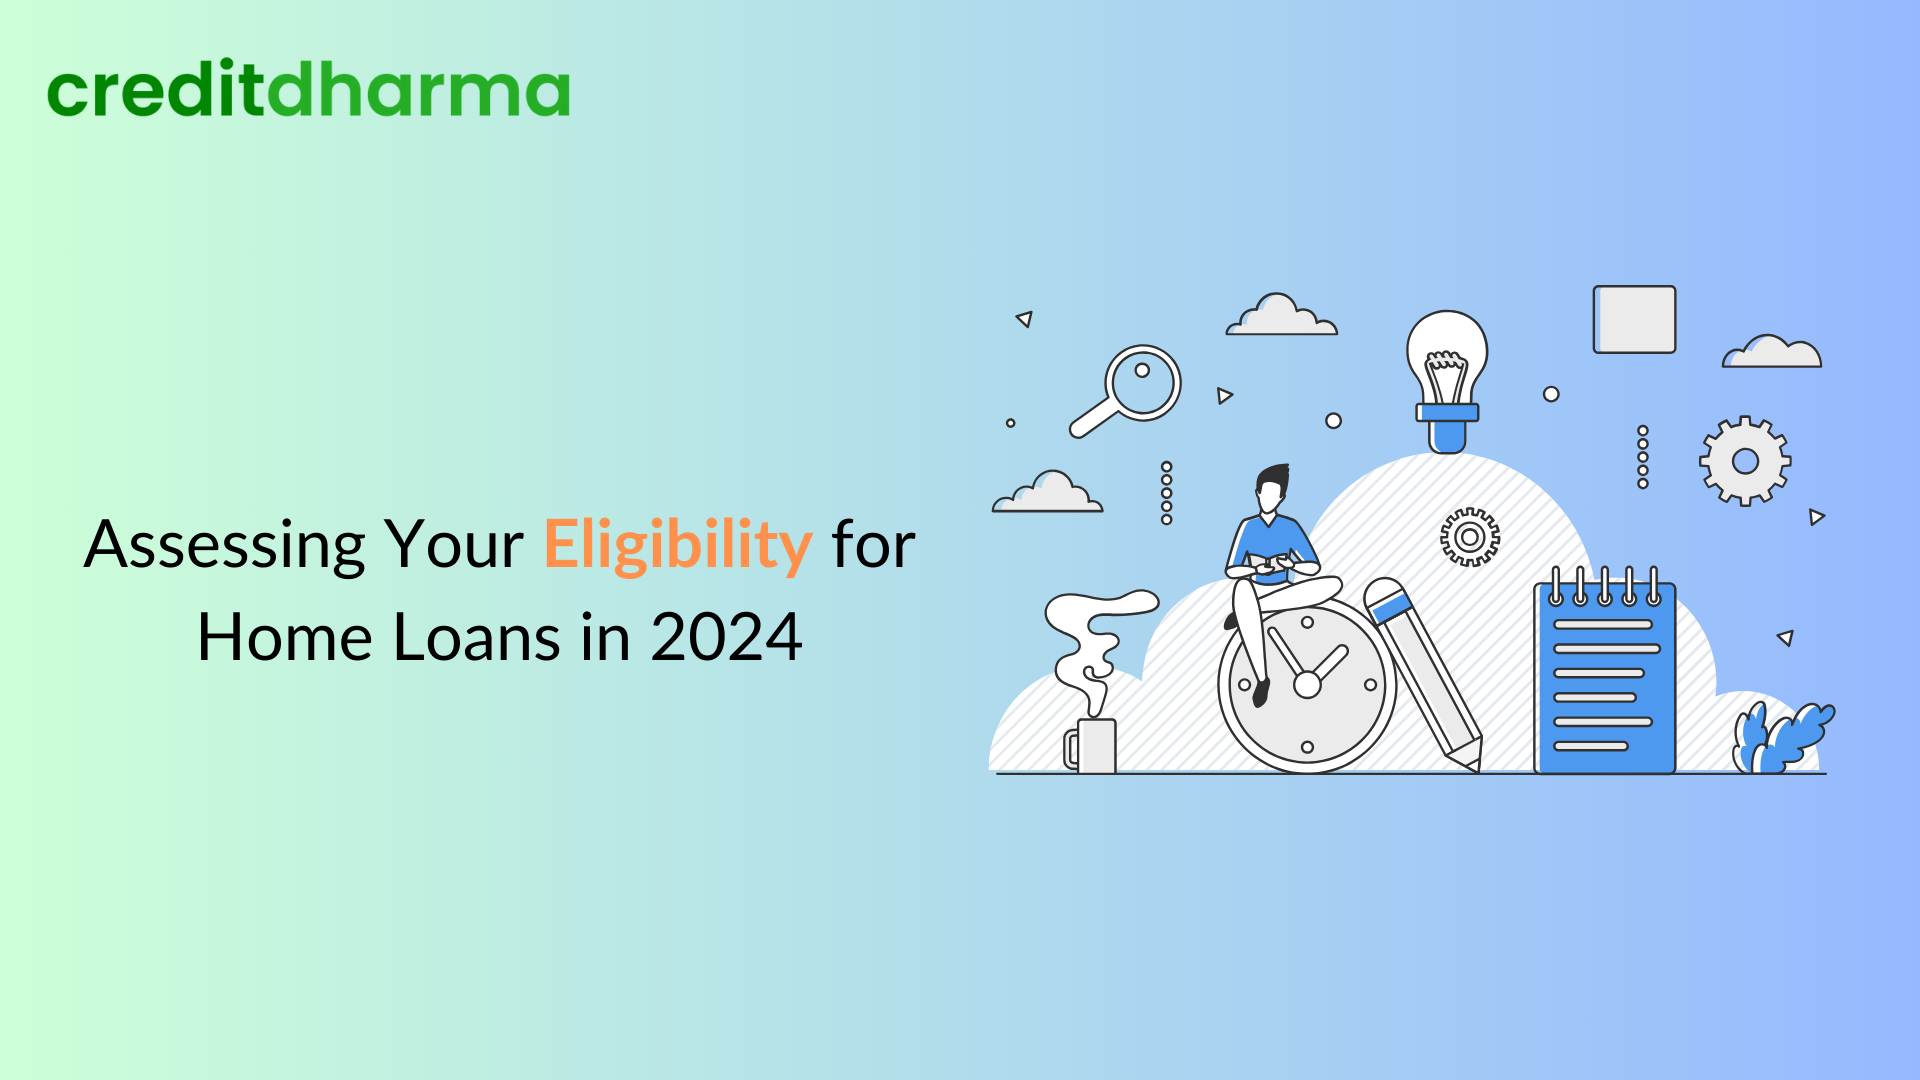 Accessing your eligibility for home loan in 2024.